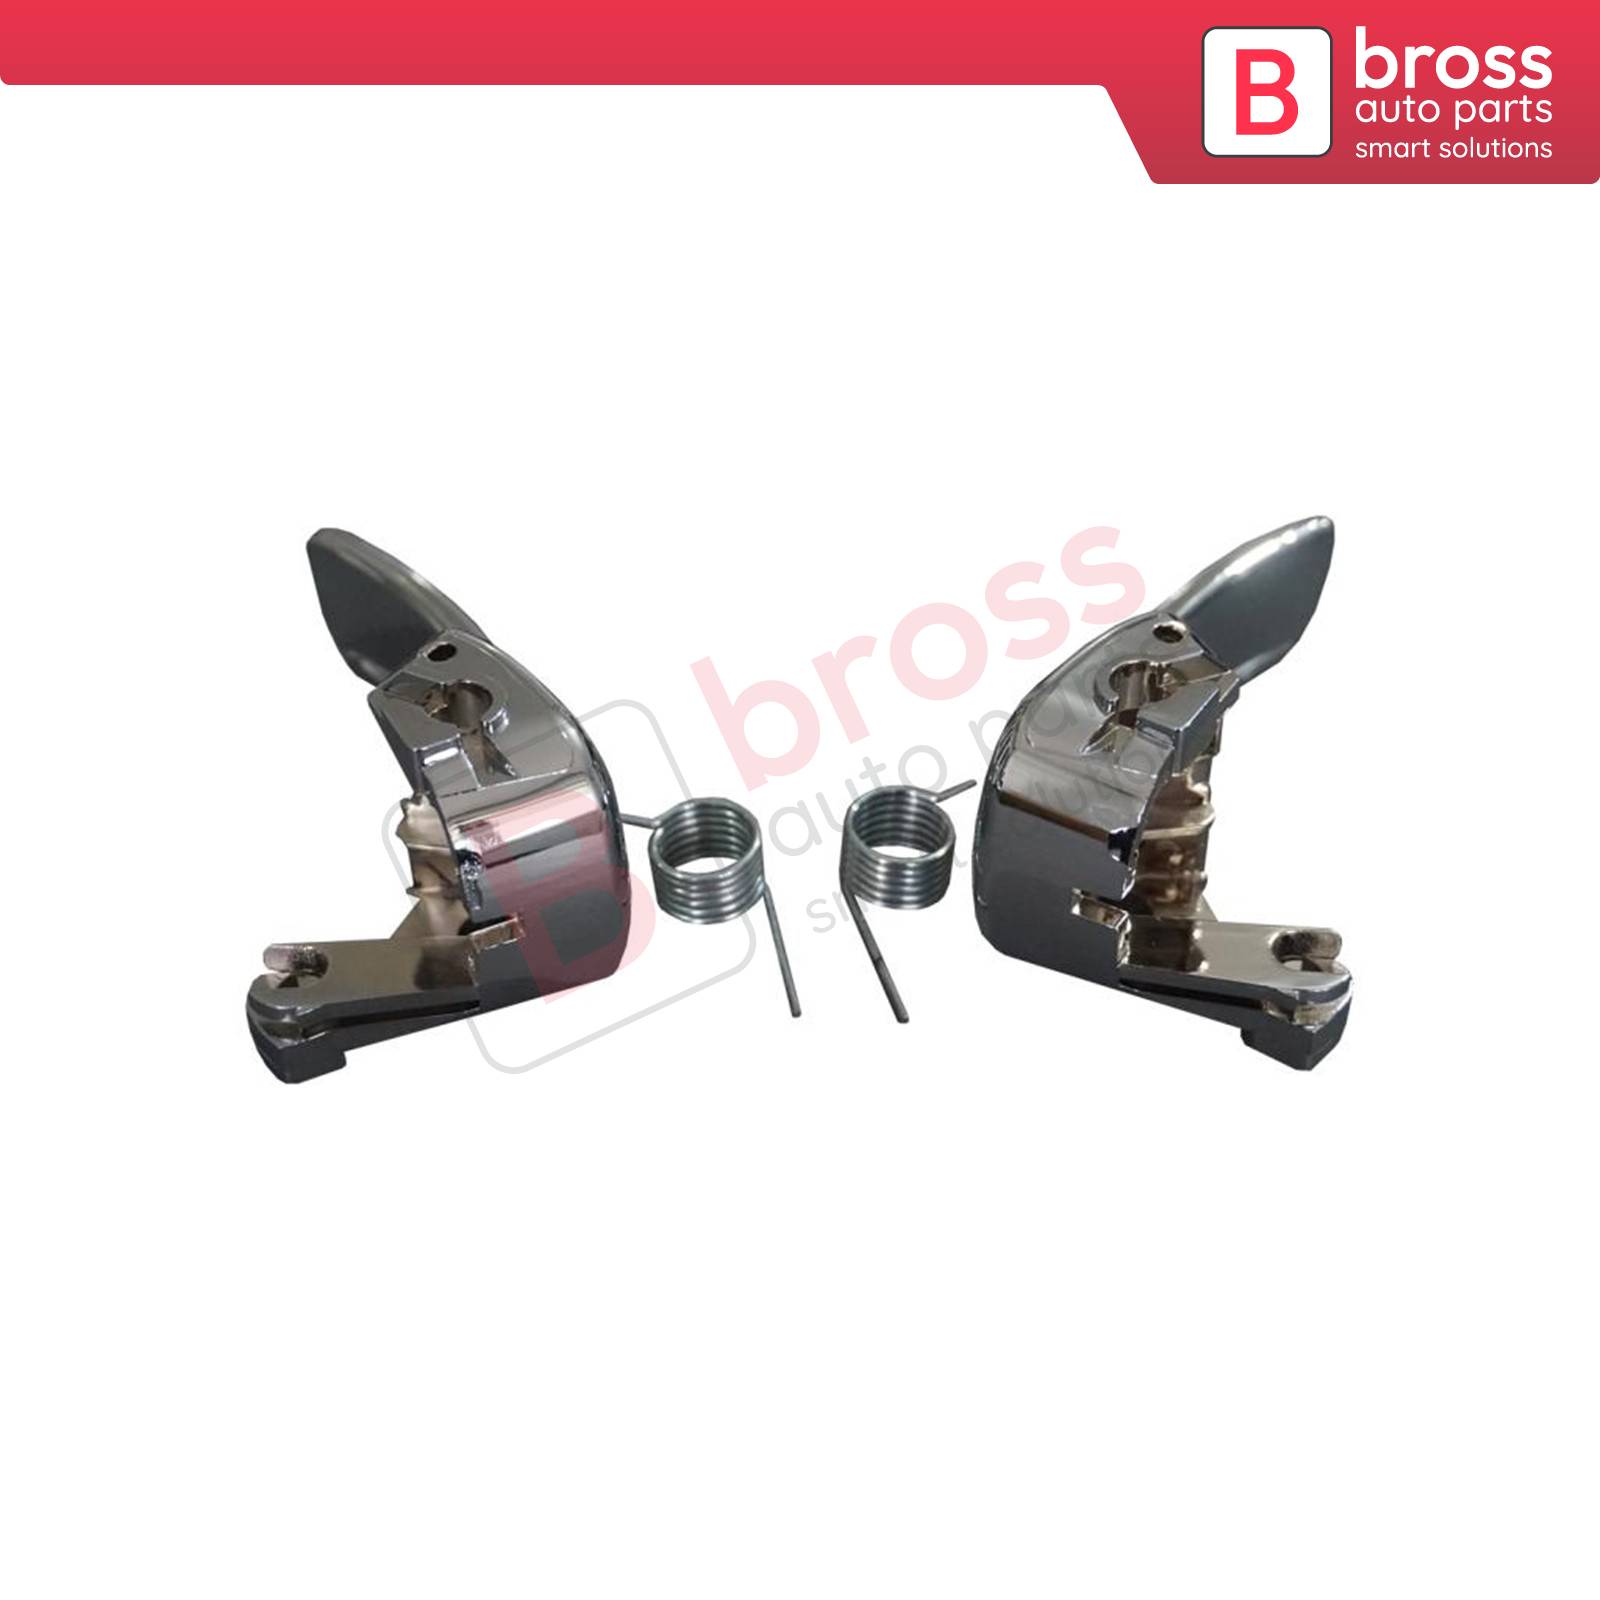 Bross Auto Parts LLC - BDP917 Interior Front or Rear Door Chrome Handle  Right and Left Side For Nissan Qashqai 2007-2013 J10 Dualis 80670JD00E  80671JD00E